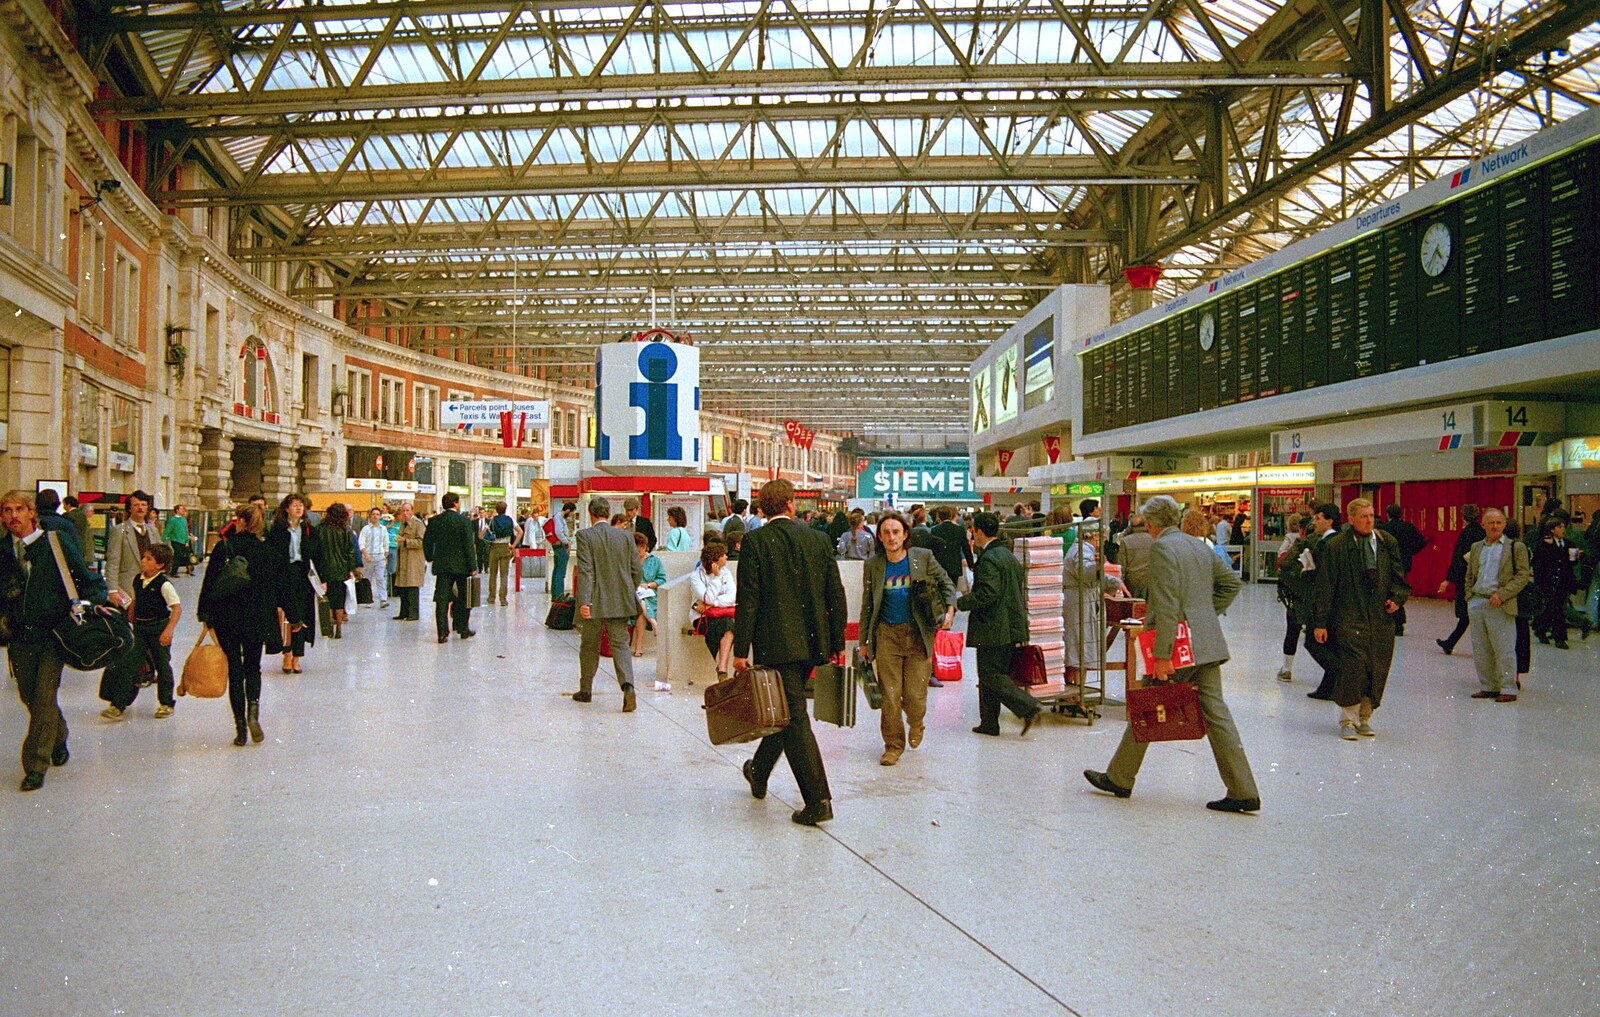 From Waterloo Station to Great Yarmouth, London and Norfolk - 20th September 1987: Commuters rush around